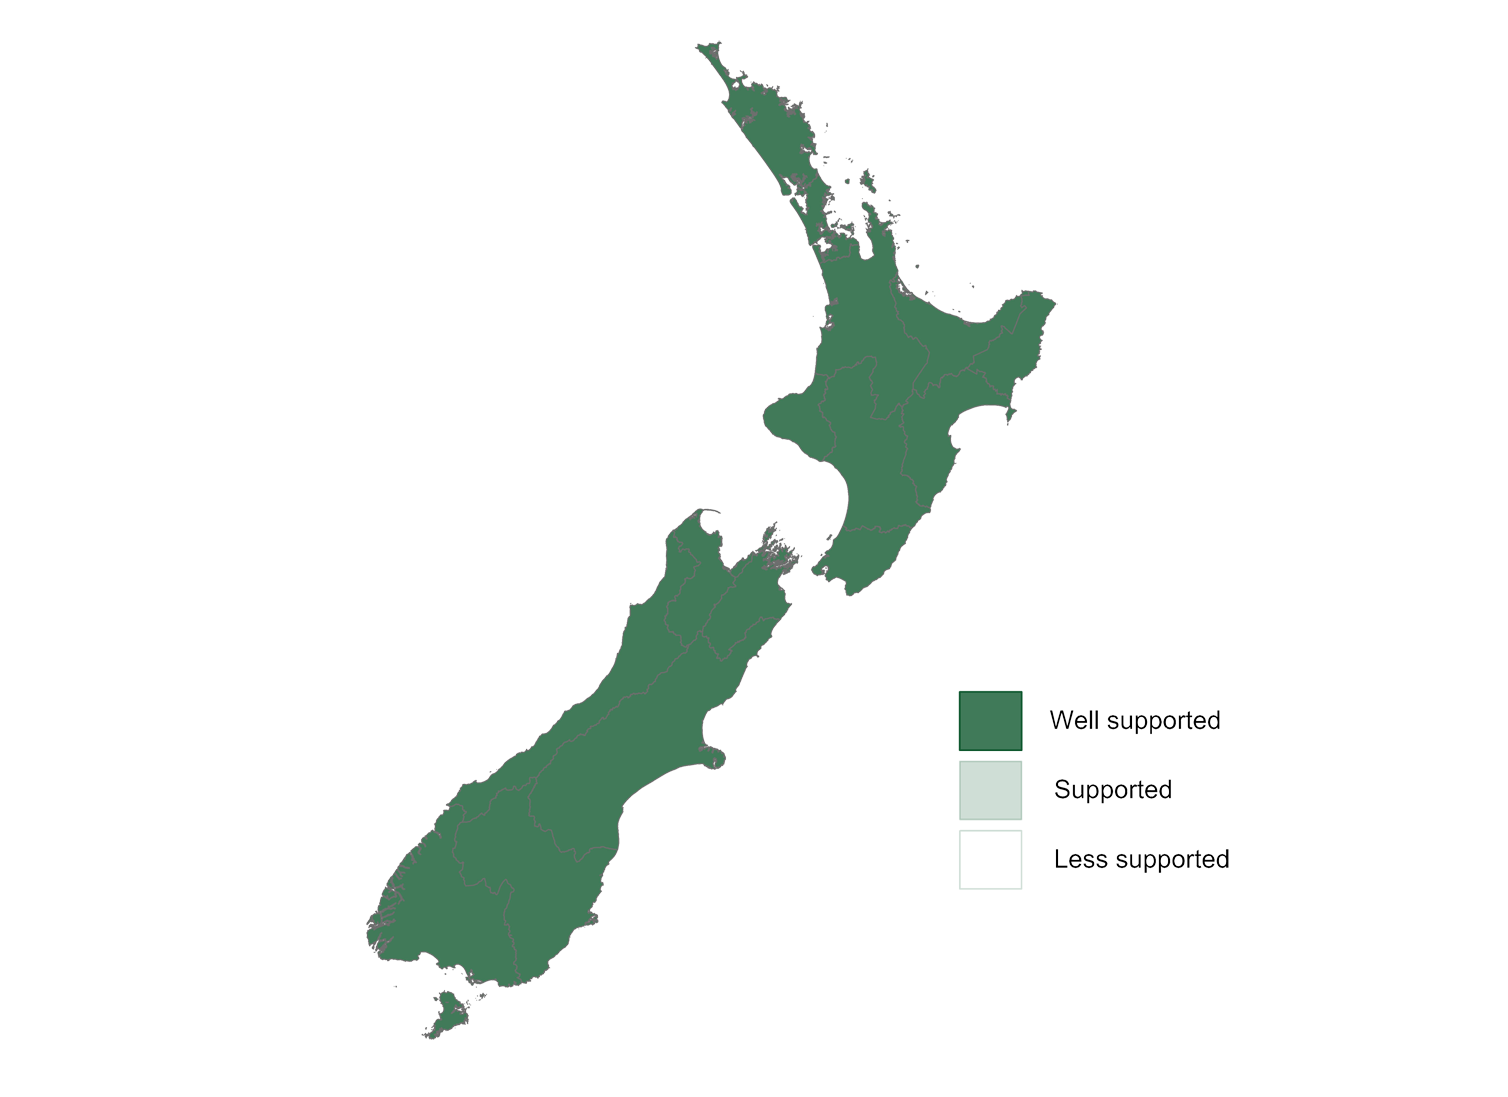 New Zealand map showing that dairy farming is supported in all regions.